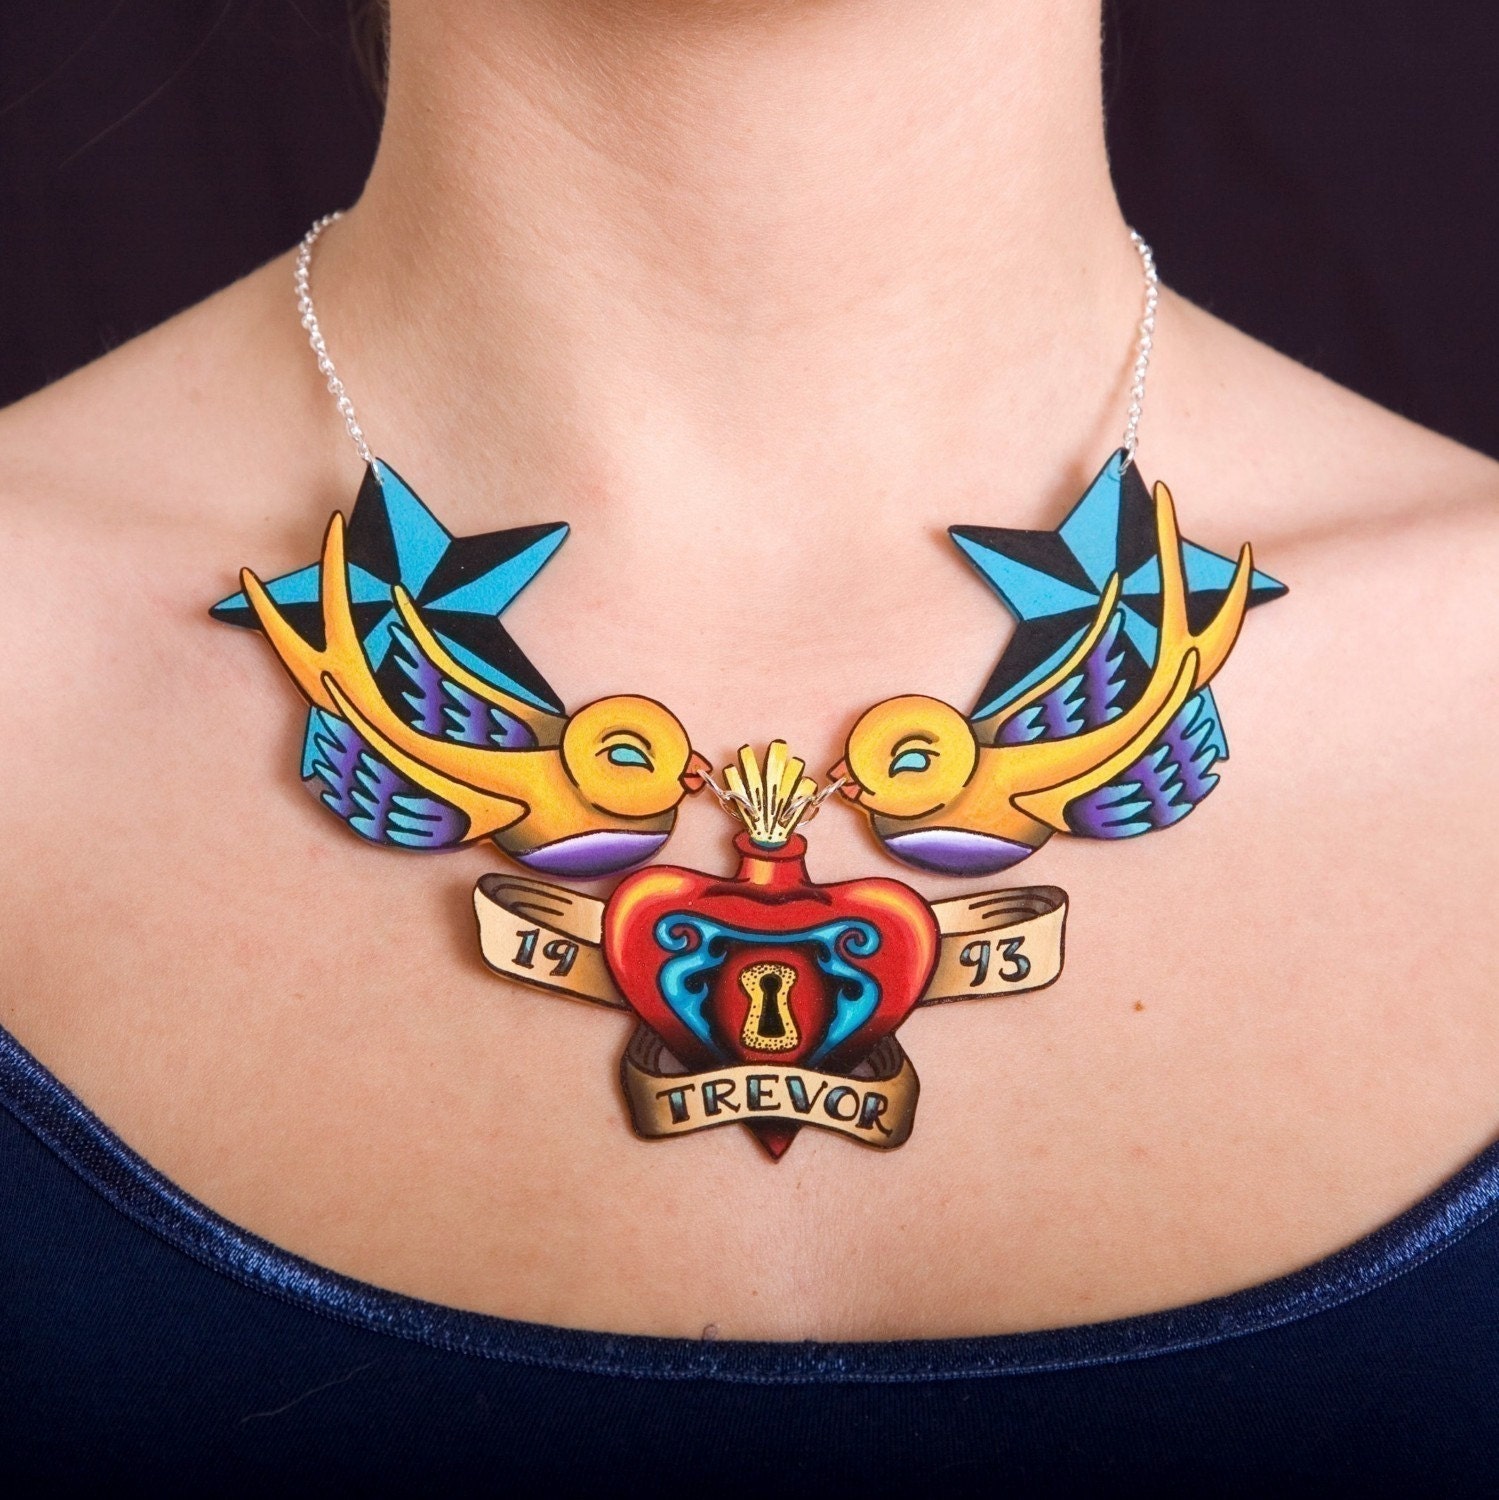 Swallows Protecting Locked Sacred Heart Chest Piece Tattoo Necklace